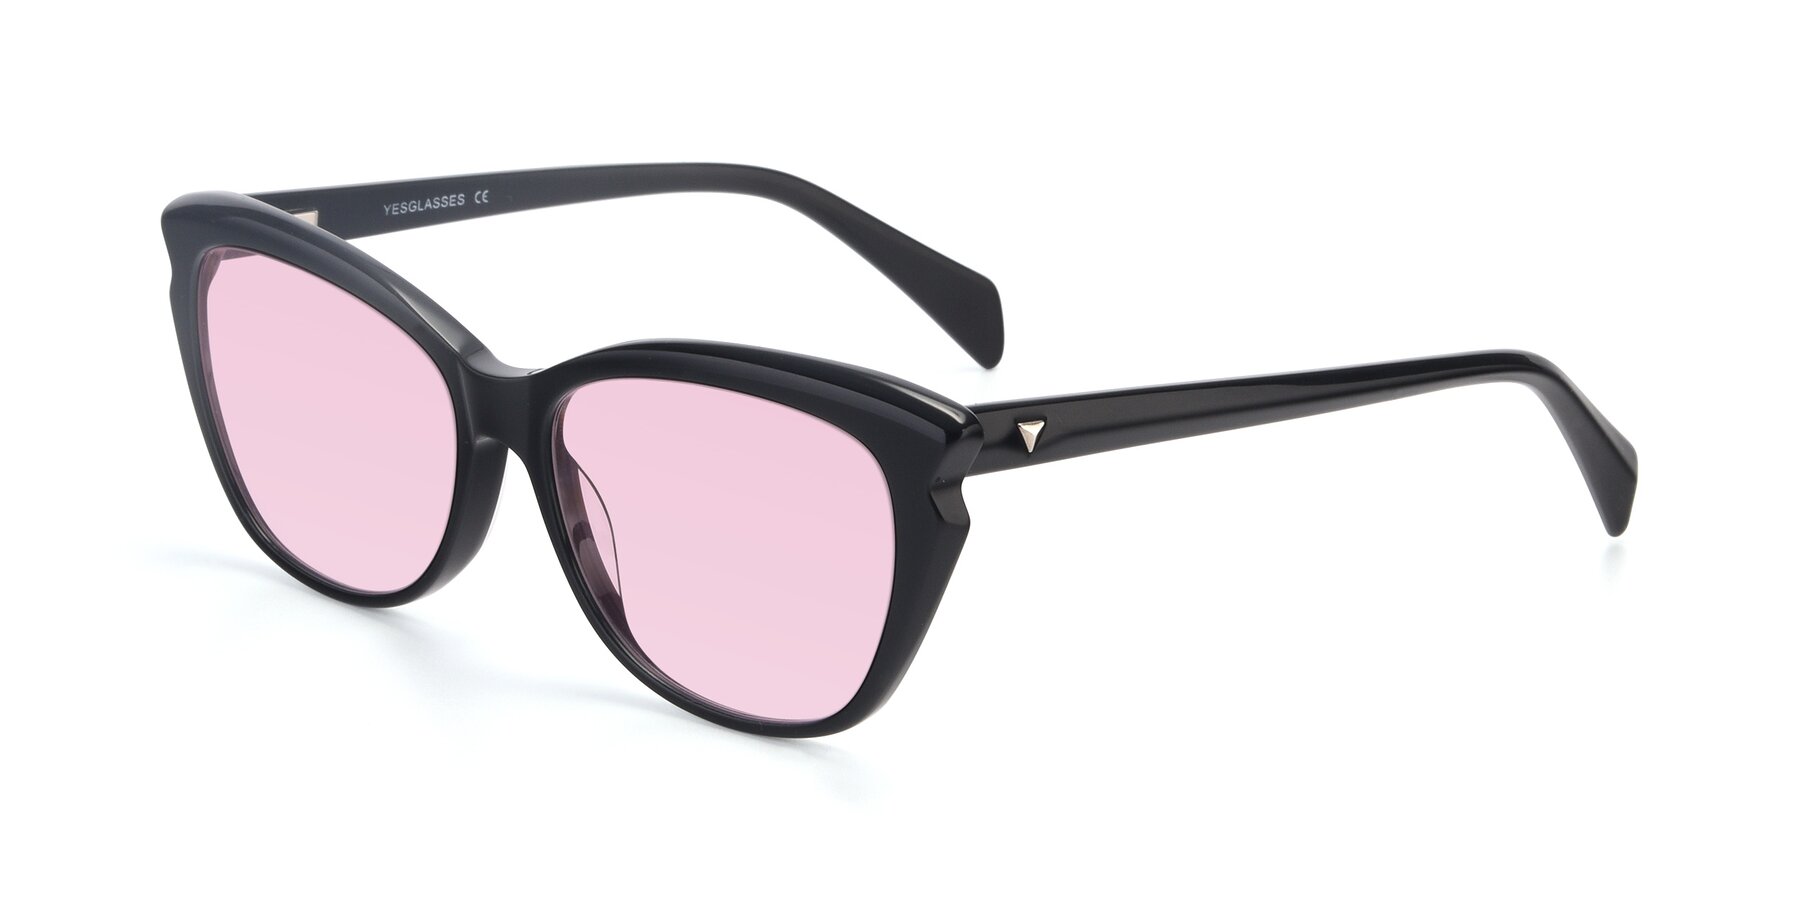 Angle of 17629 in Black with Light Pink Tinted Lenses